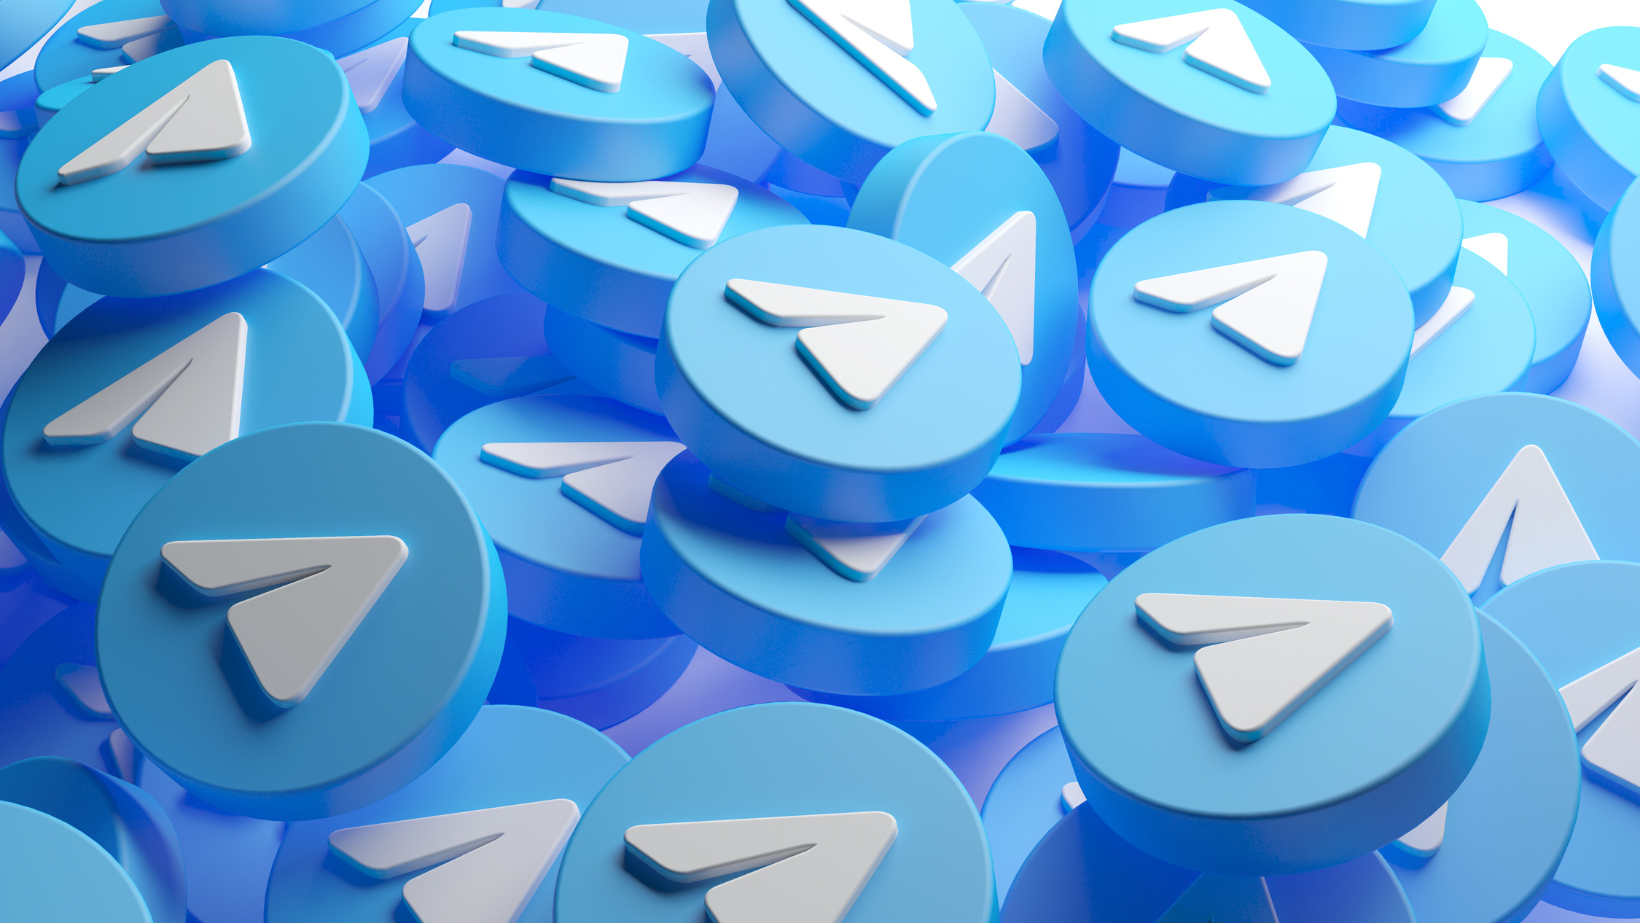 Telegram’s Mega Update: 3 Game-Changing Features Every User Should Know About Now